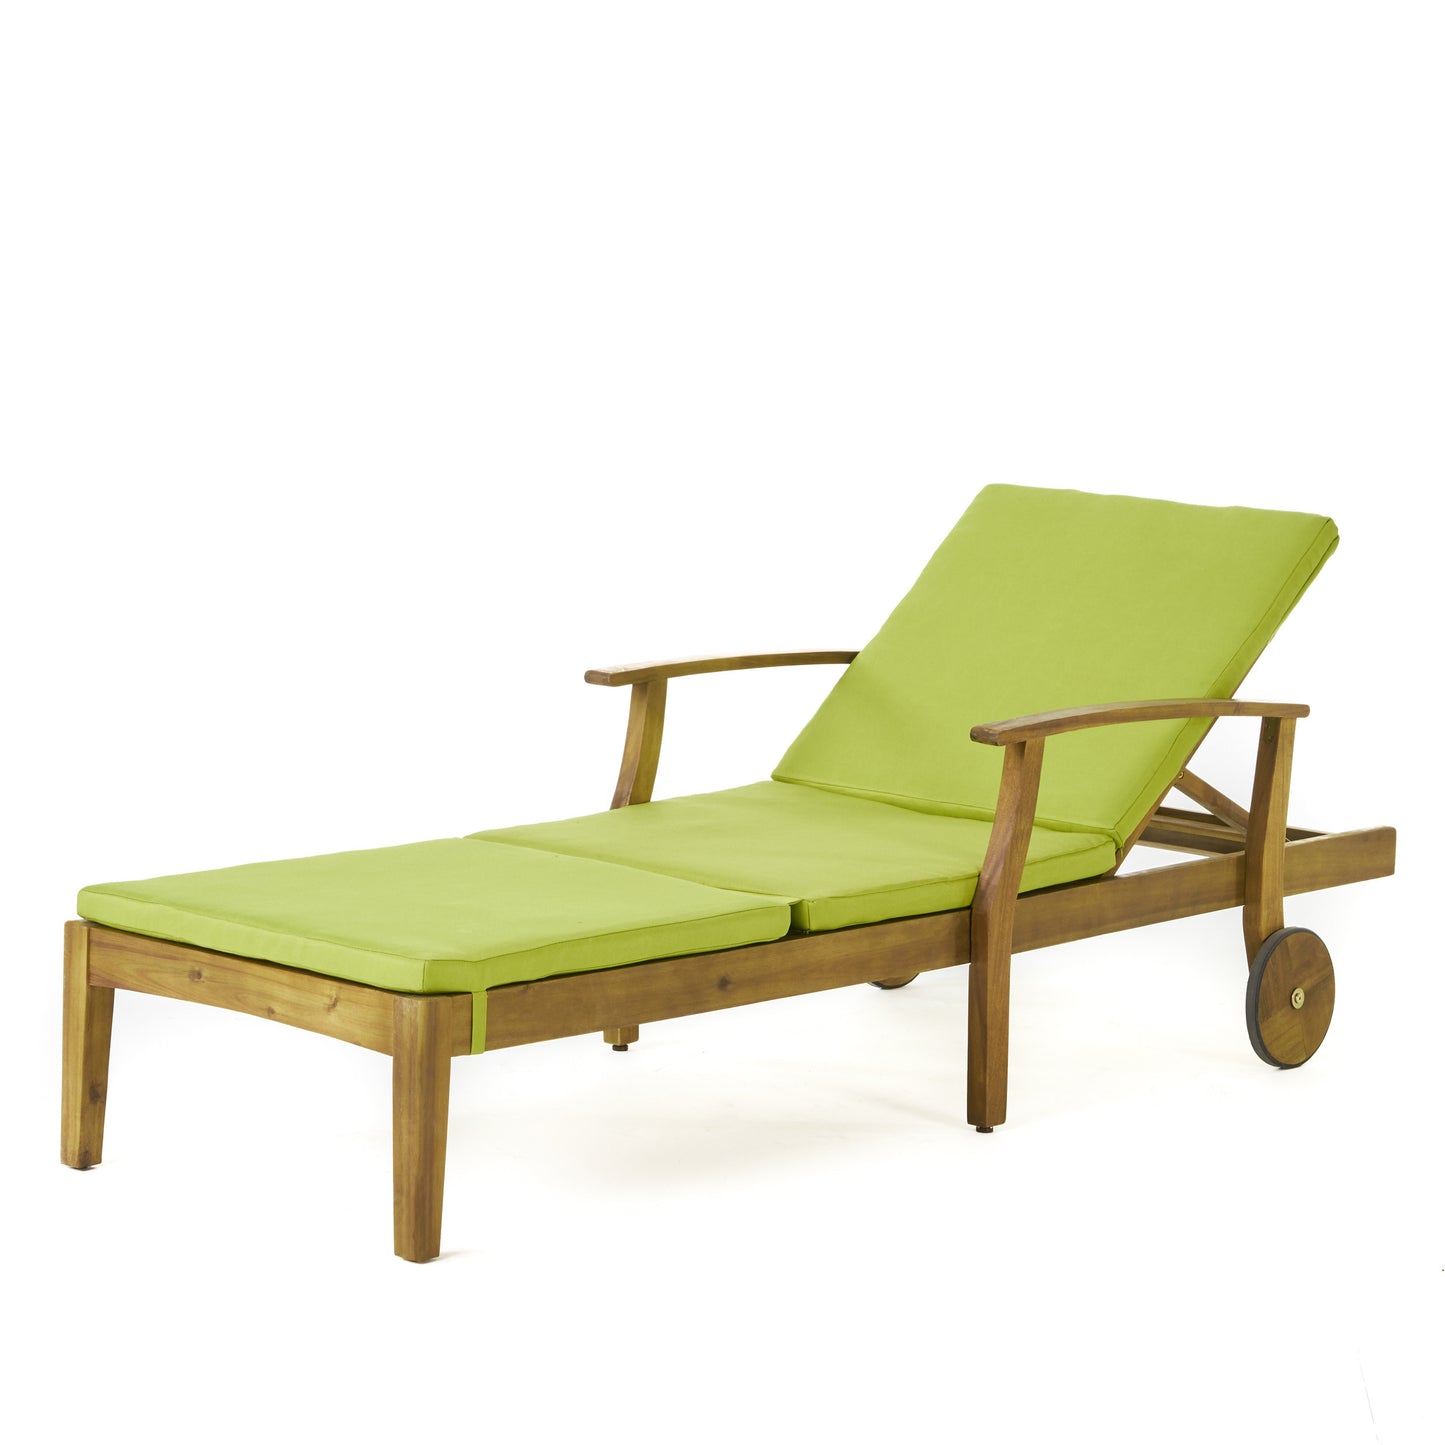 Daisy Outdoor Teak Finish Chaise Lounge with Water Resistant Cushion